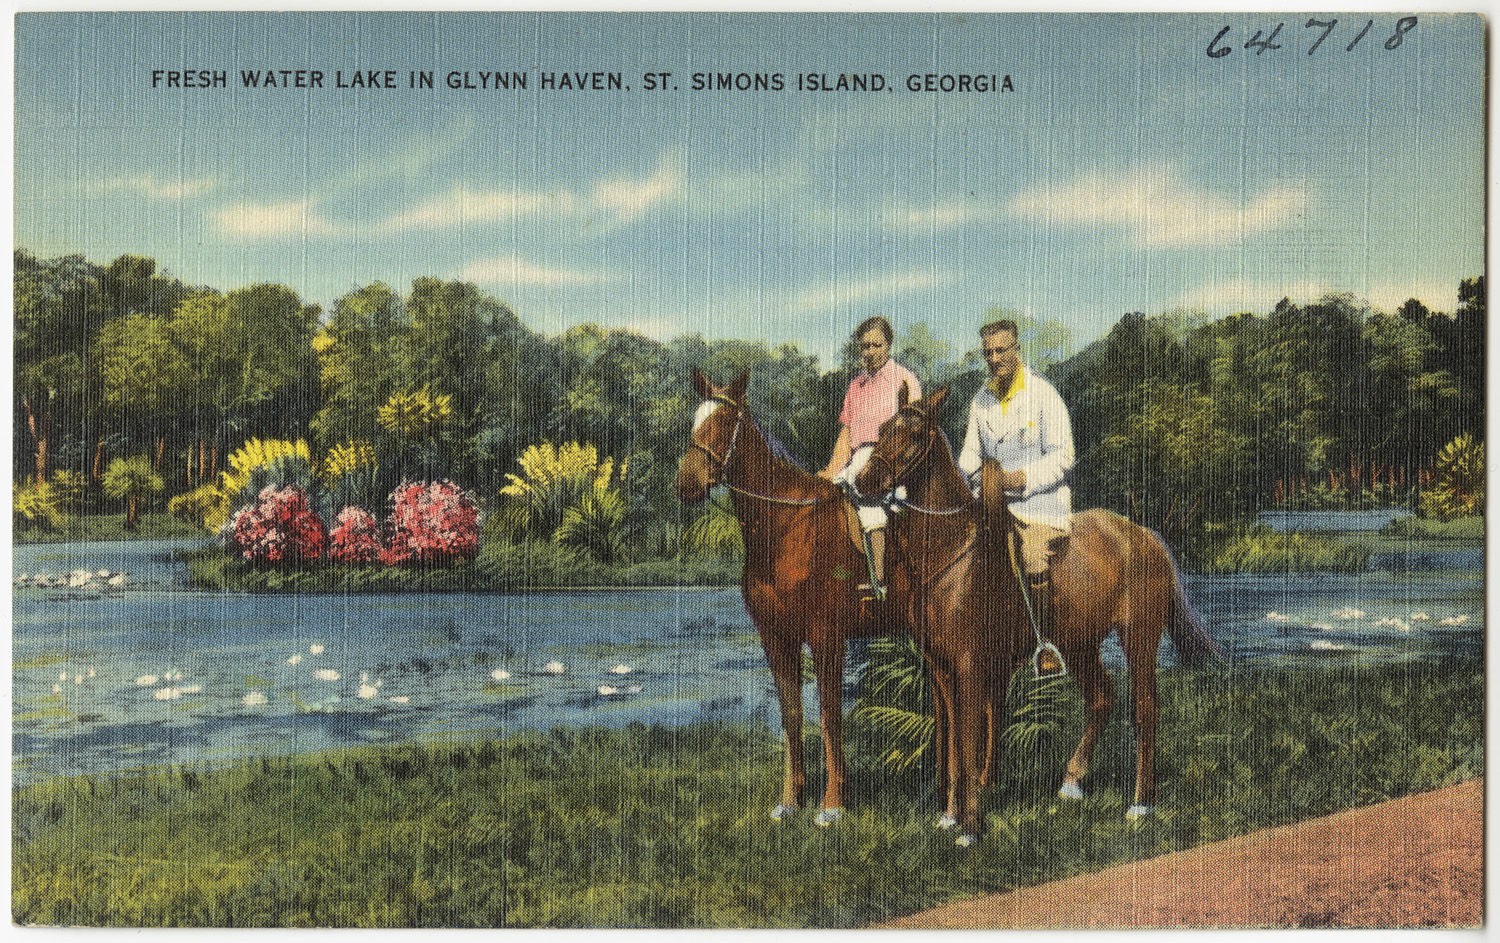 a painting of two people on horses in front of the water